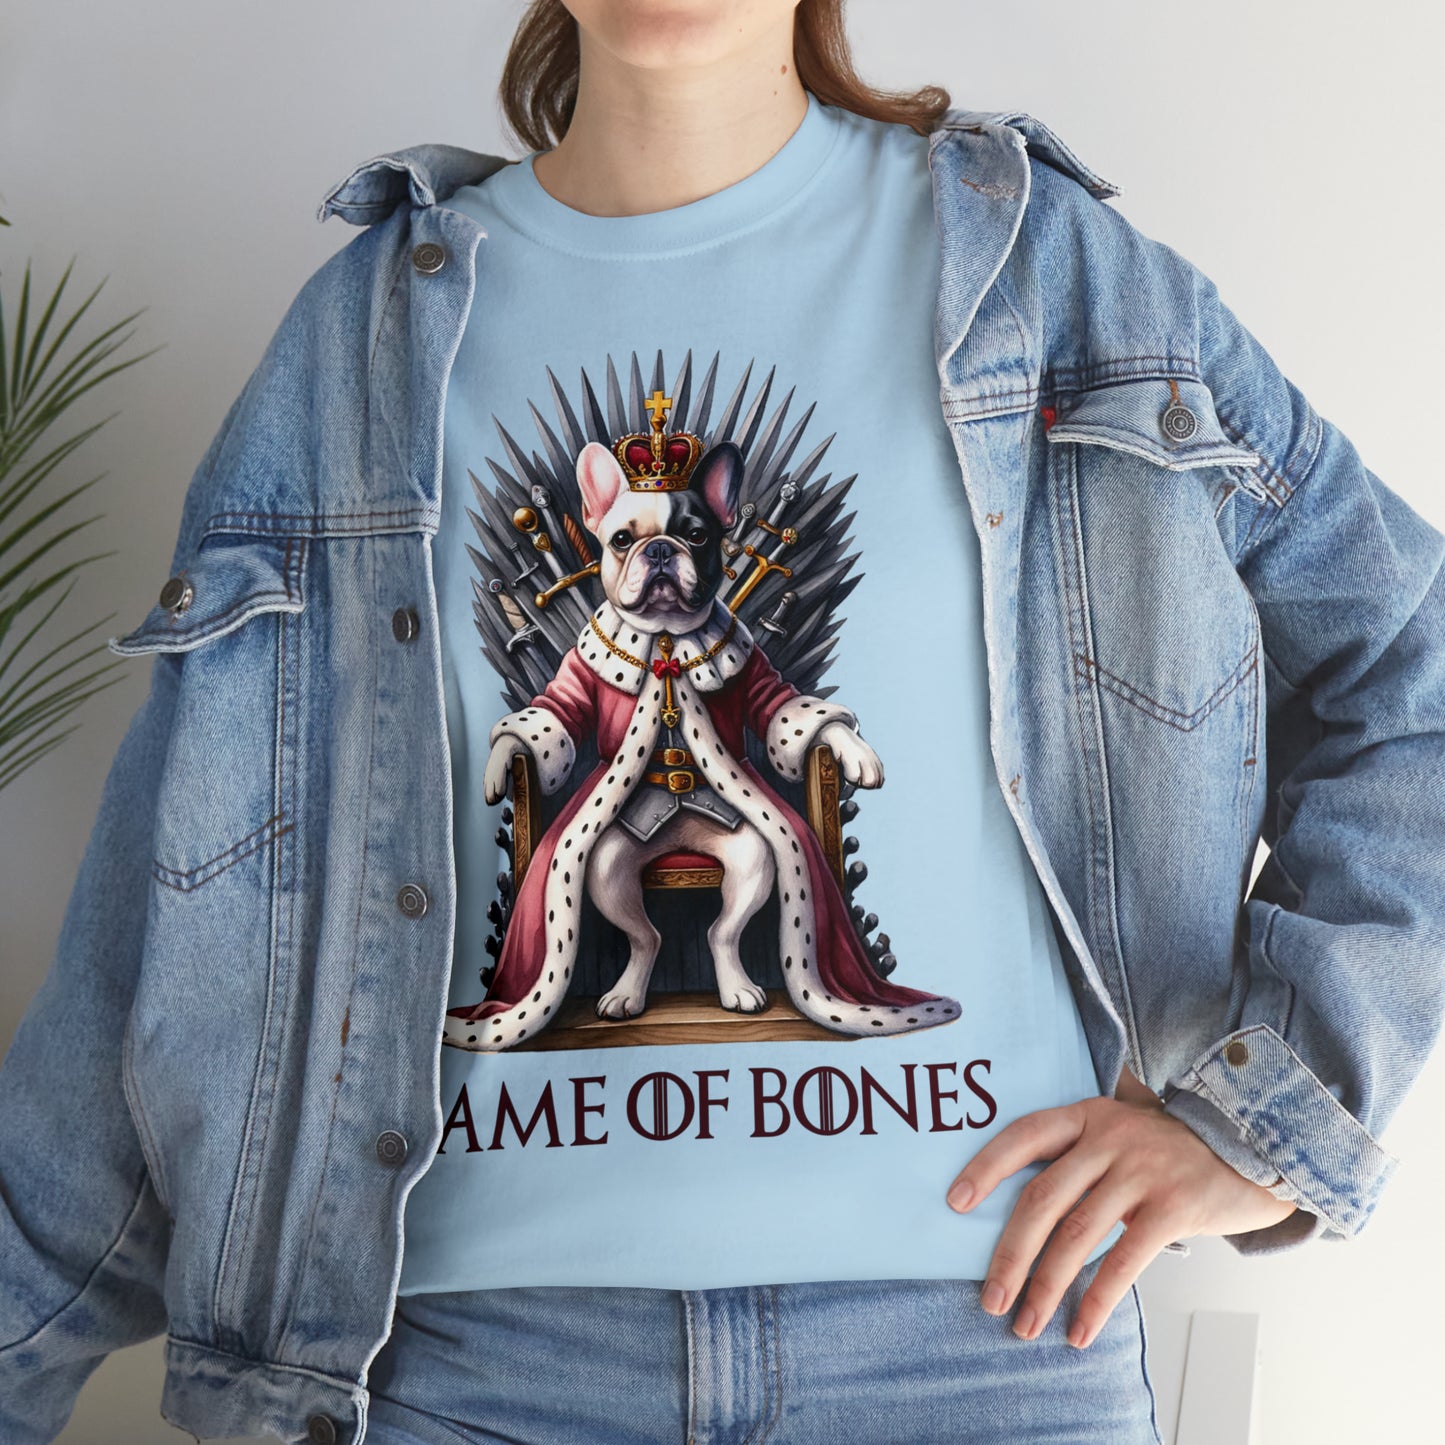 Game of Frenchies - Unisex Cotton T-Shirt